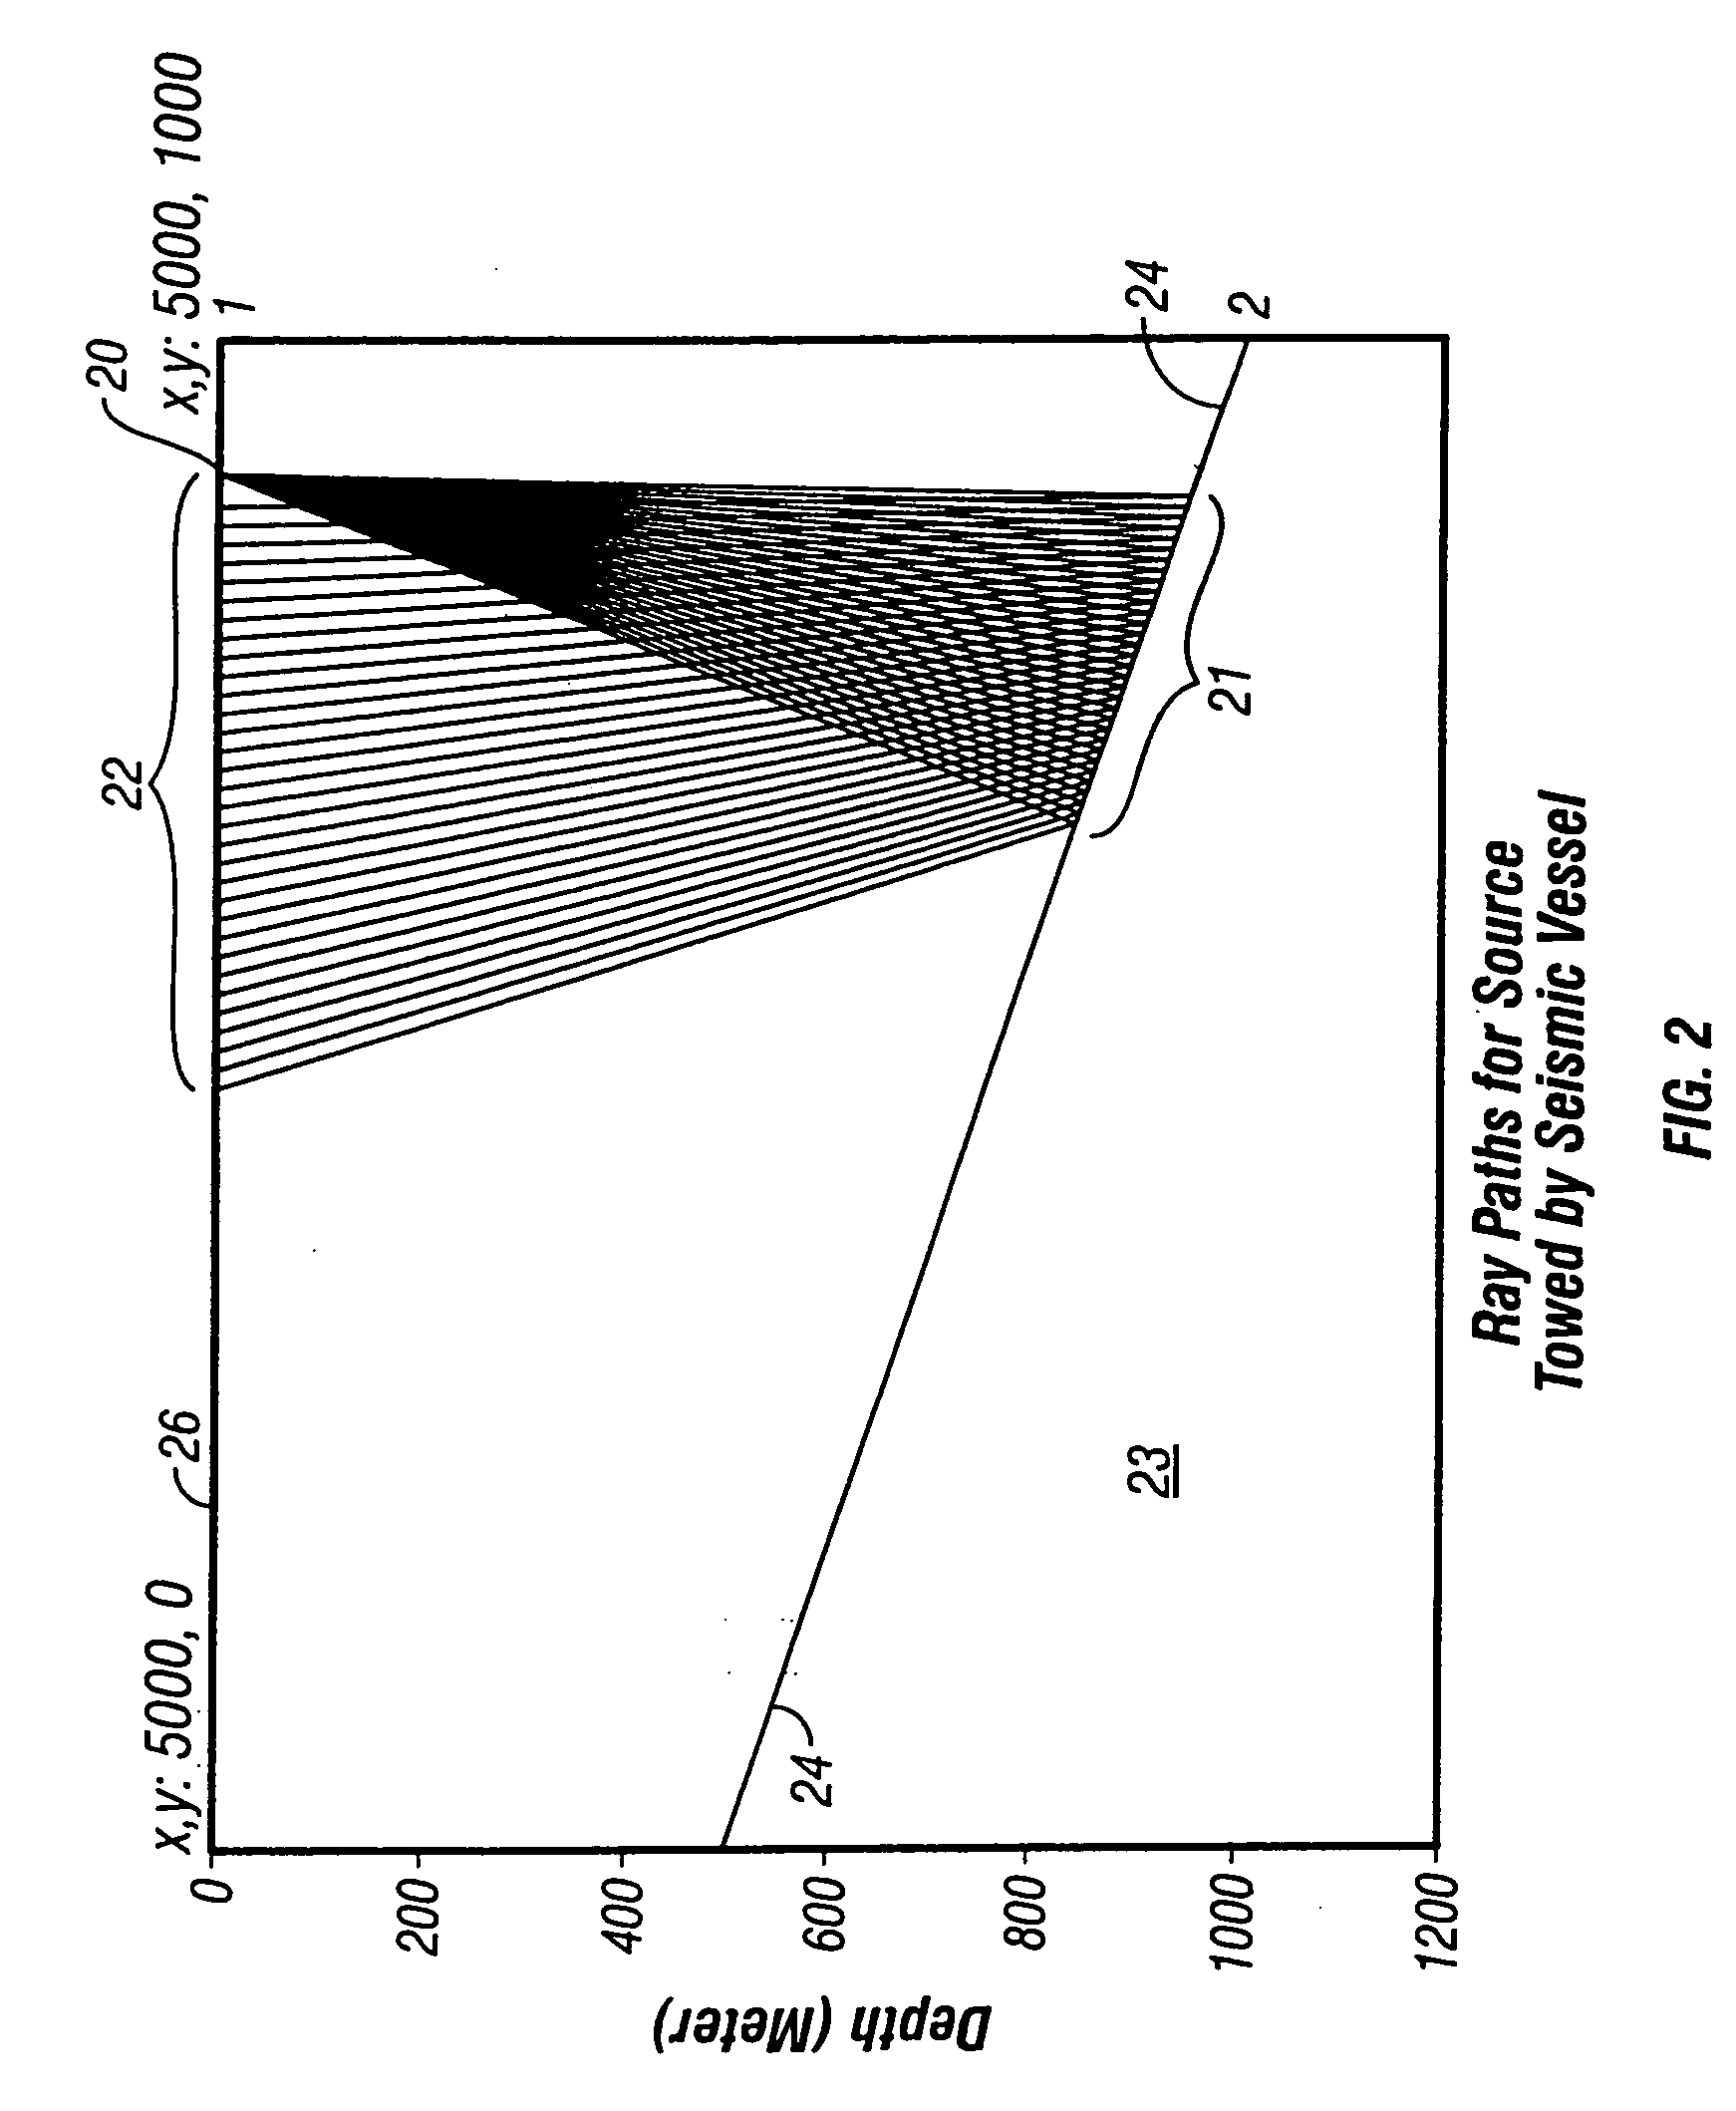 Method for separating seismic signals from two or more distinct sources